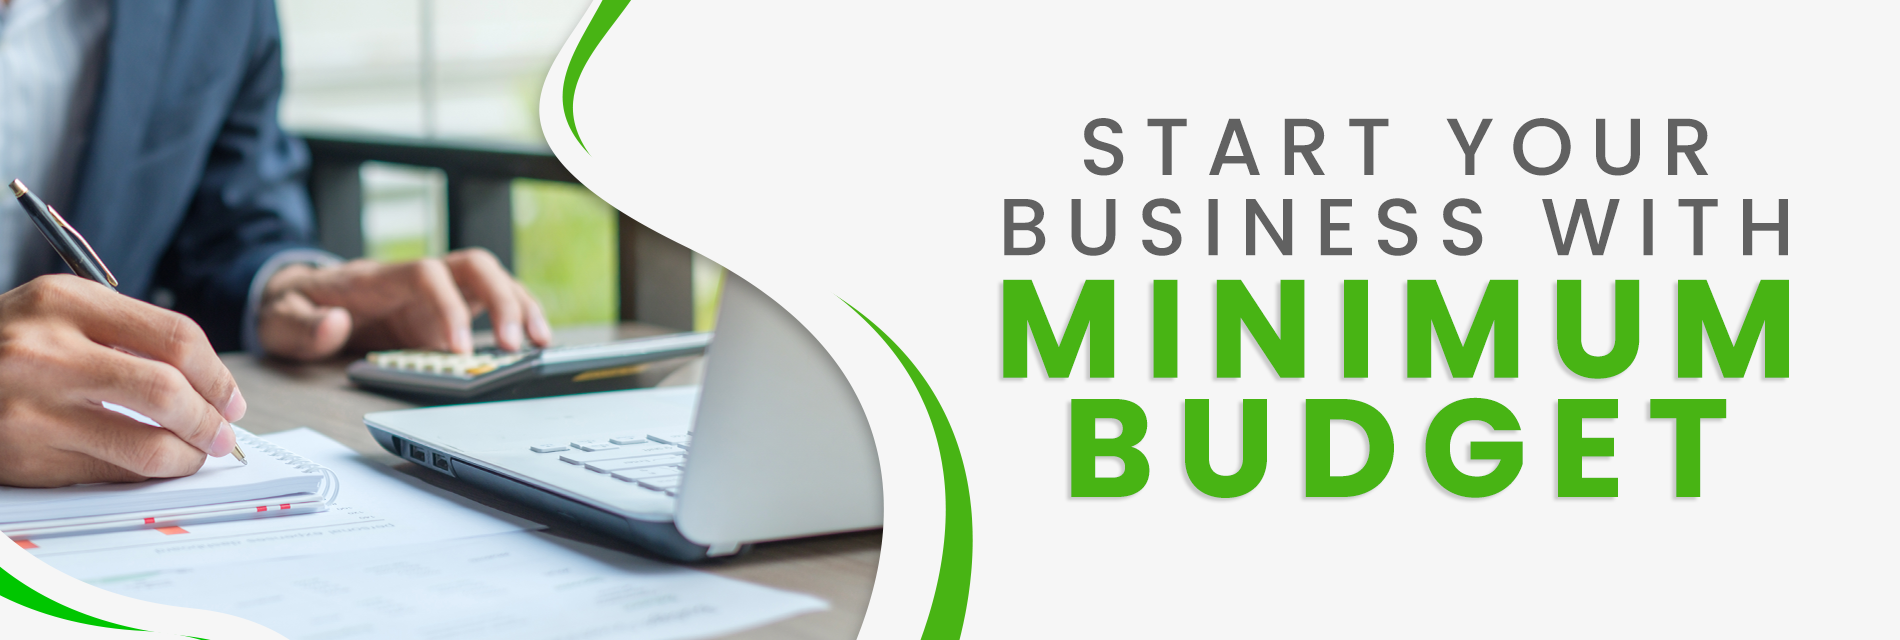 Produx-Pro_START-YOUR-BUSINESS-WITH-MINIMUM-BUDGET-1.png